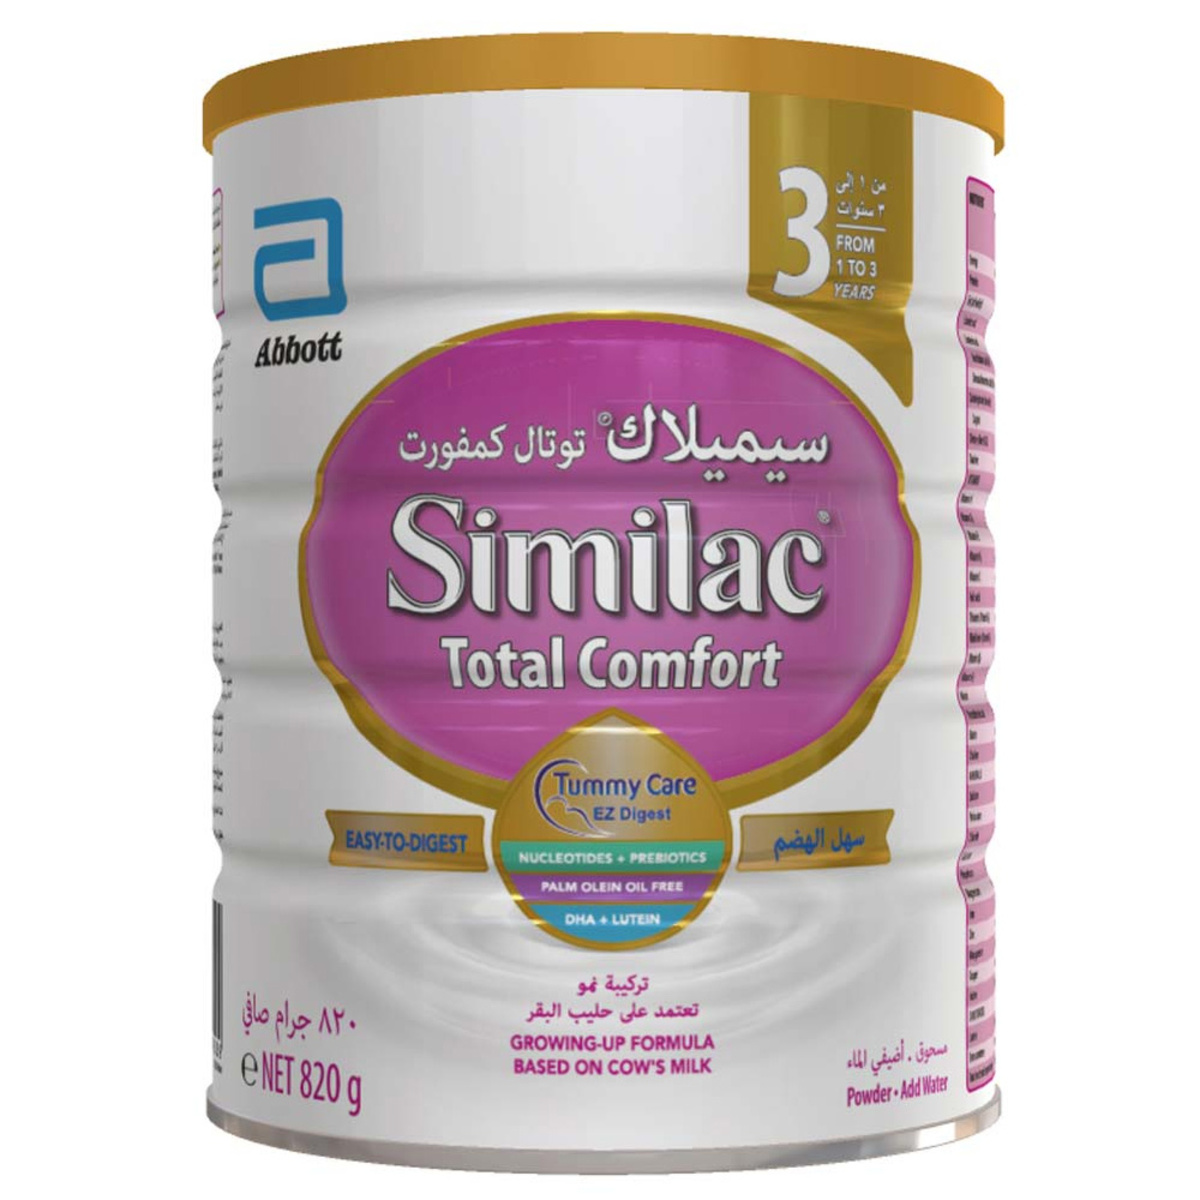 Similac Total Comfort 3 Growing Up Formula For 1-3 Years 820 g